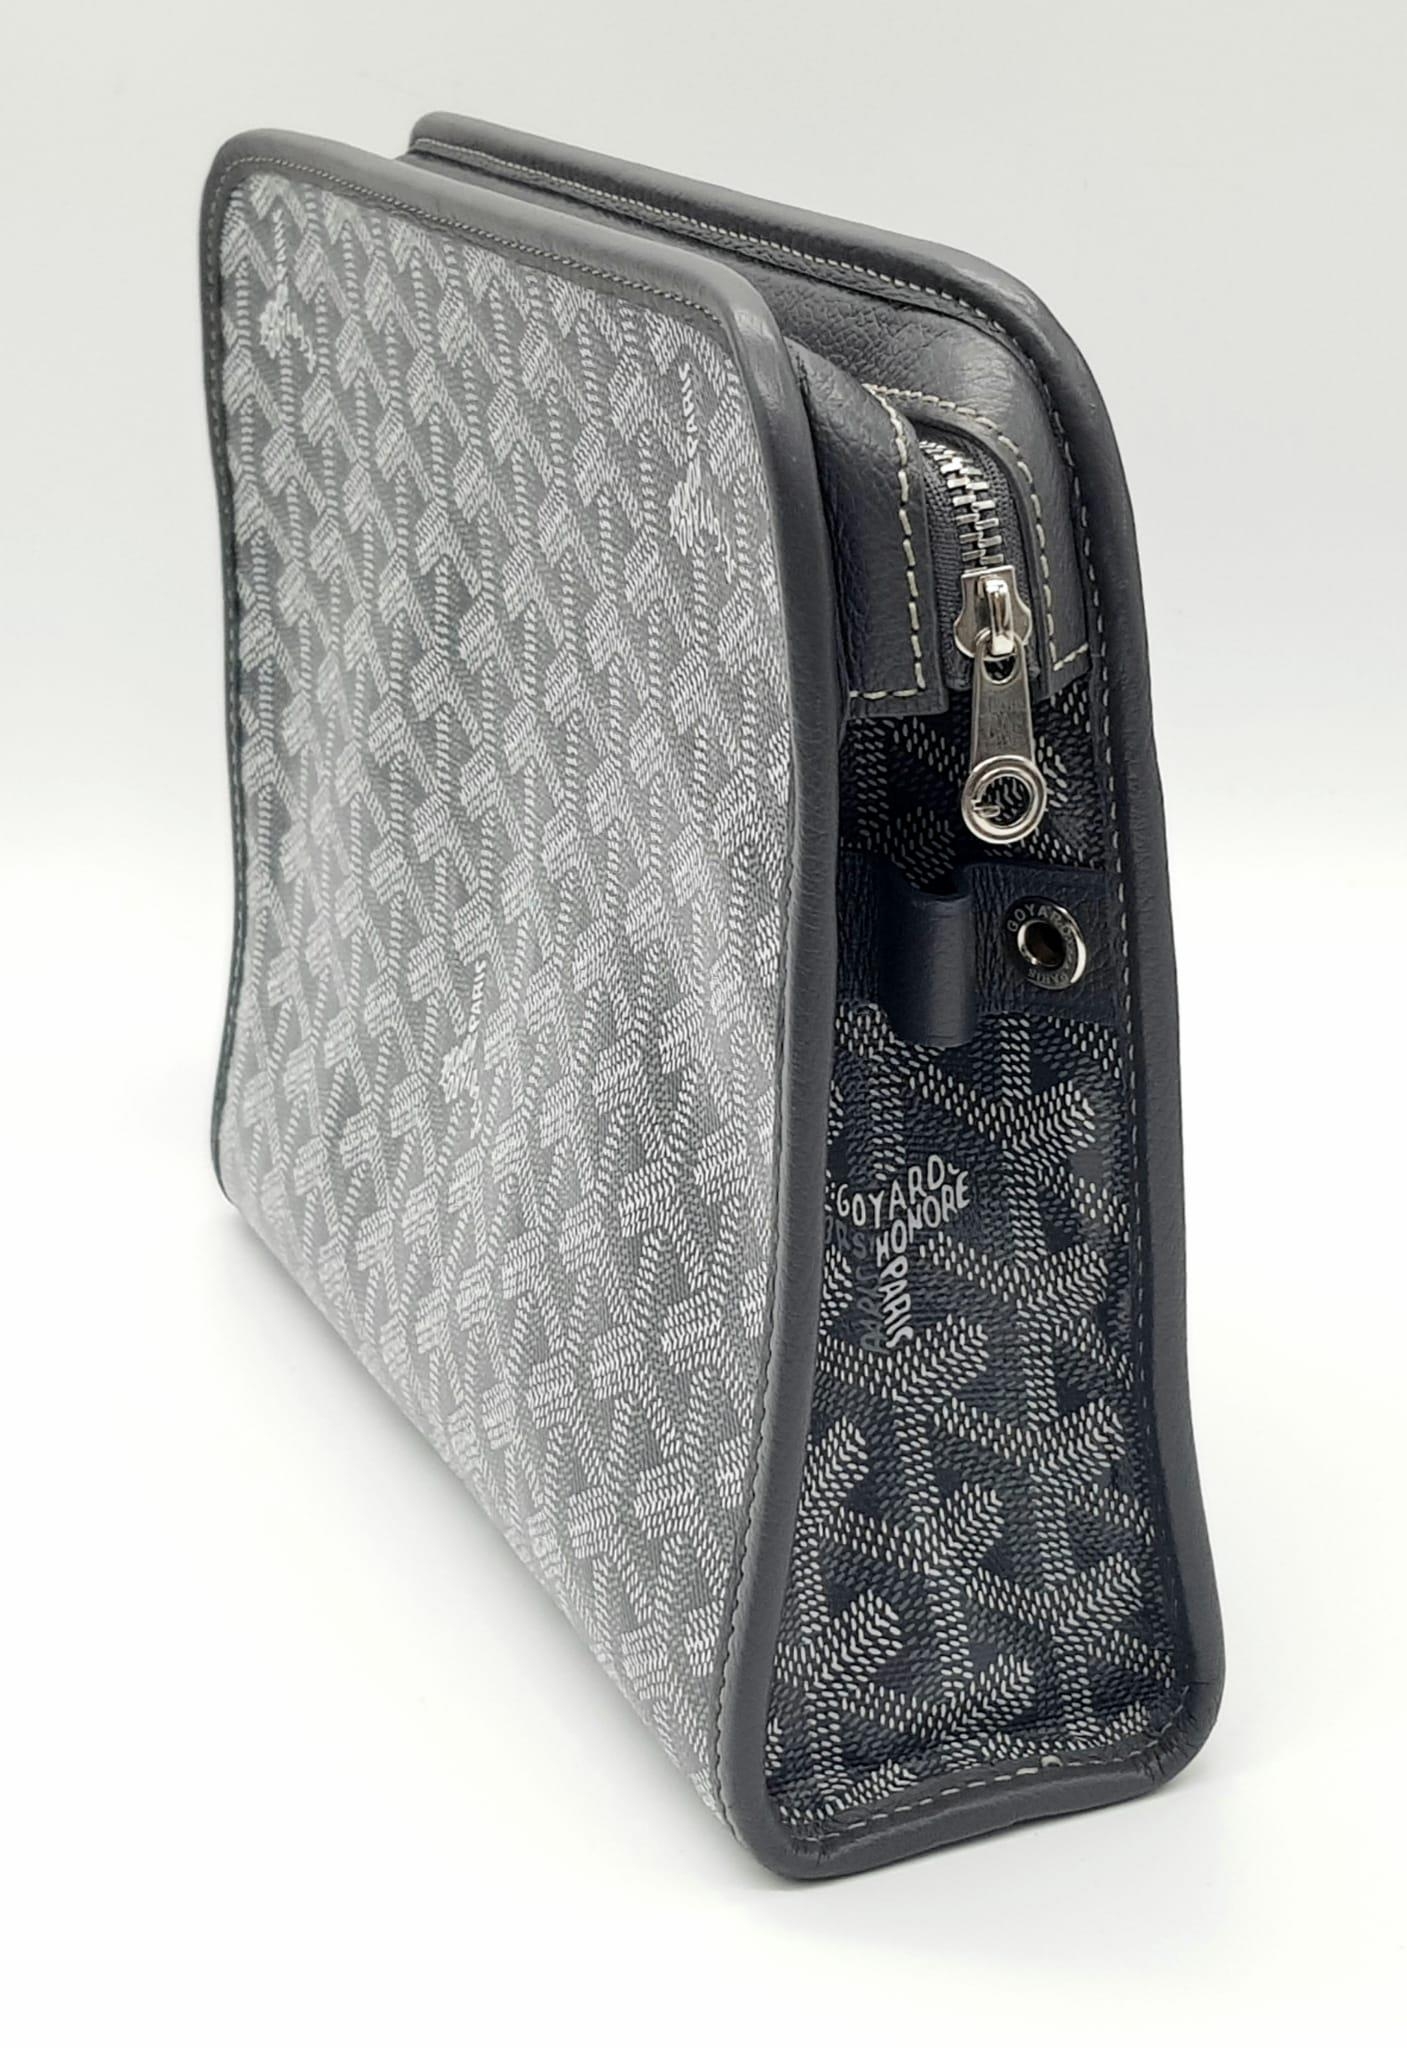 A Goyard Jouvence Grey Washbag. Grey and white geometric pattern on canvas. Water resistant inner - Image 4 of 8